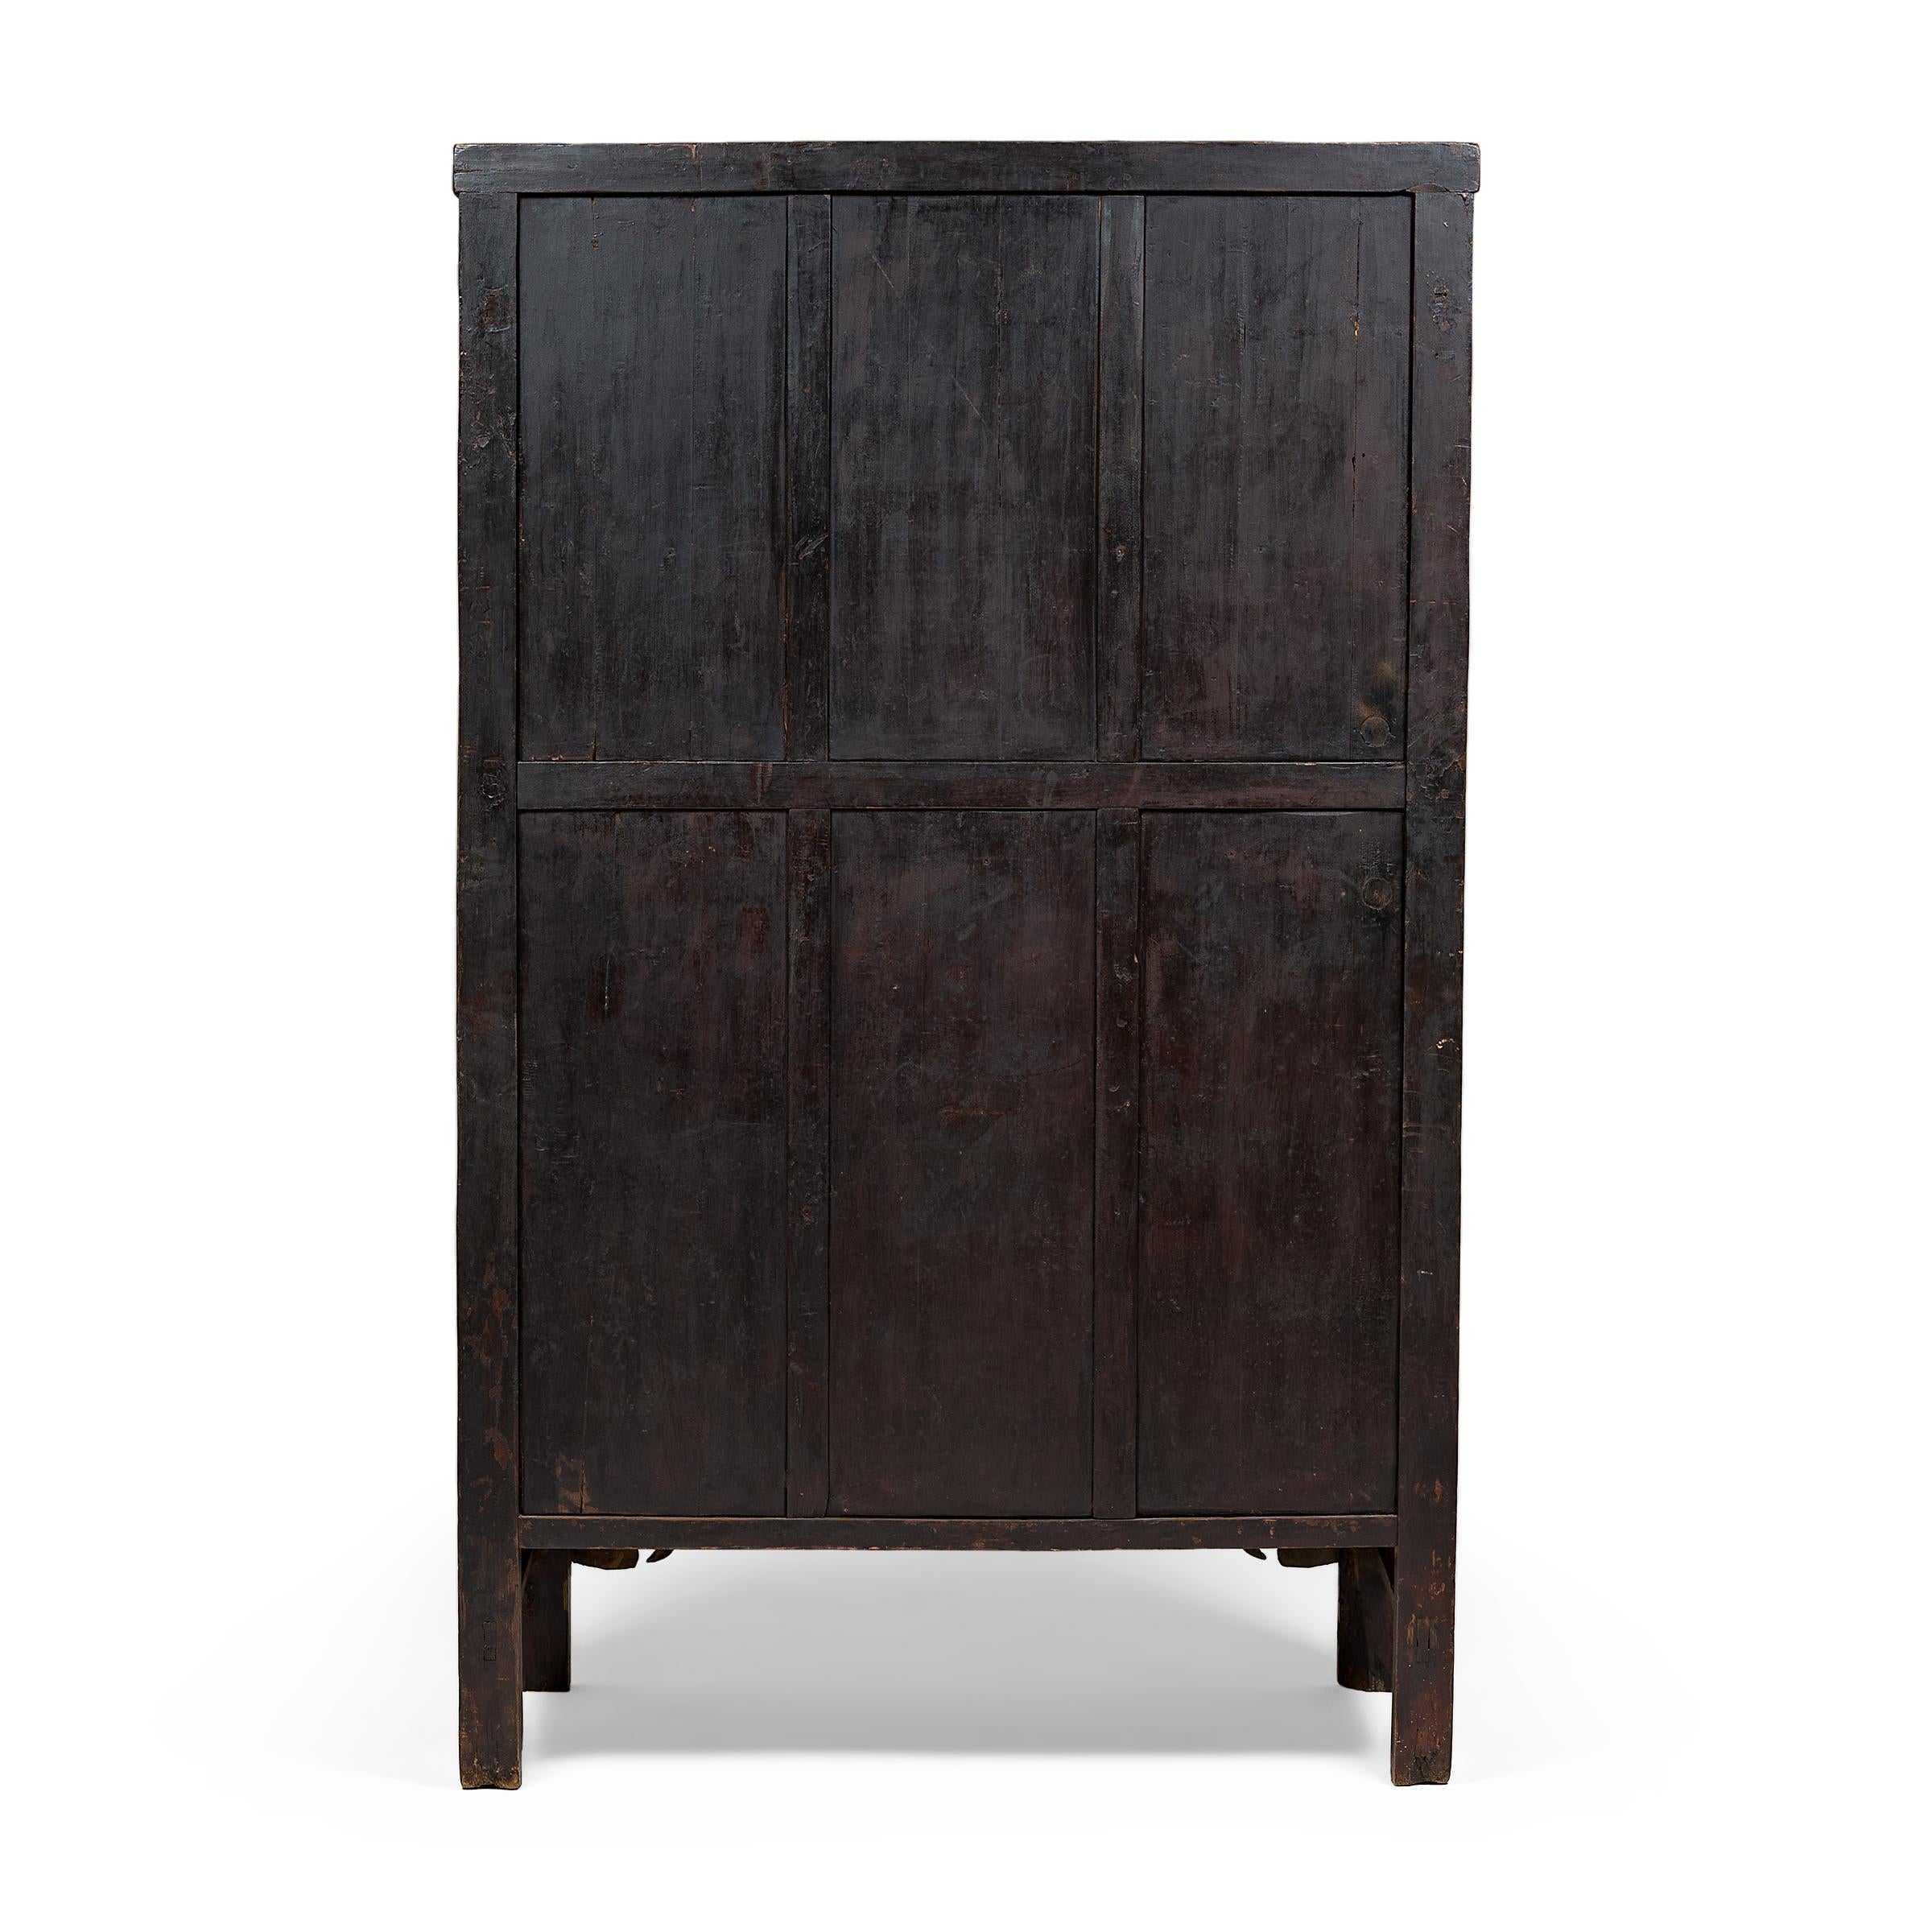 19th Century Chinese Painted Black Lacquer Scholars' Cabinet, c. 1800 For Sale